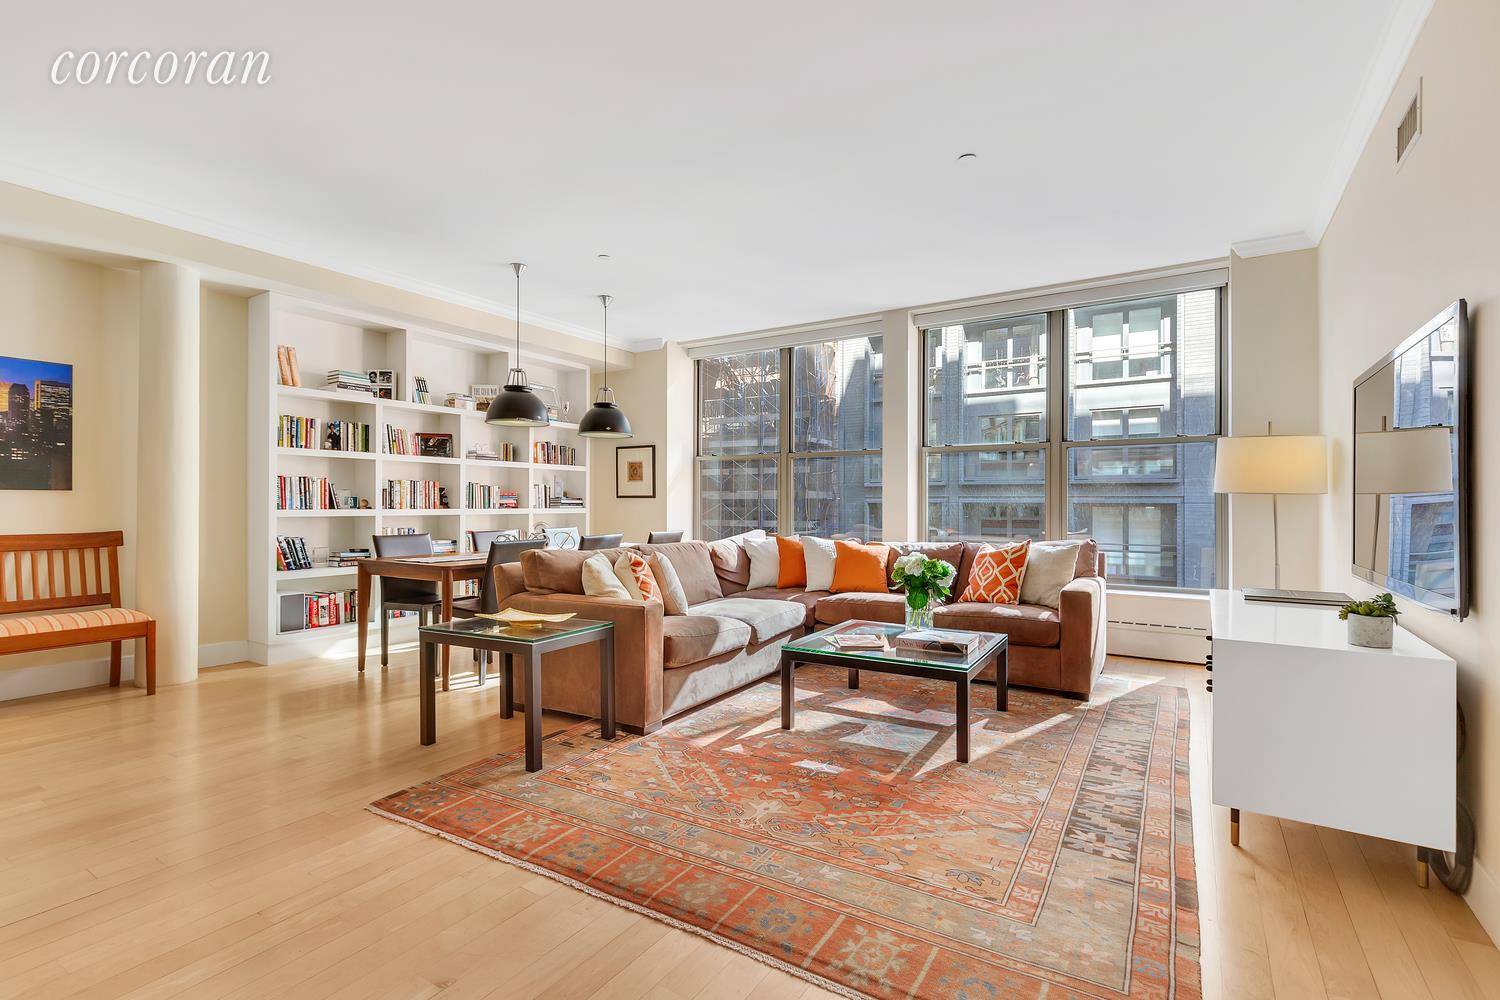 Featuring 8 north facing oversized windows, this bright and modern prewar condo loft home in the heart of Chelsea features nearly 1, 400 square feet, two bedrooms, two bathrooms and ...